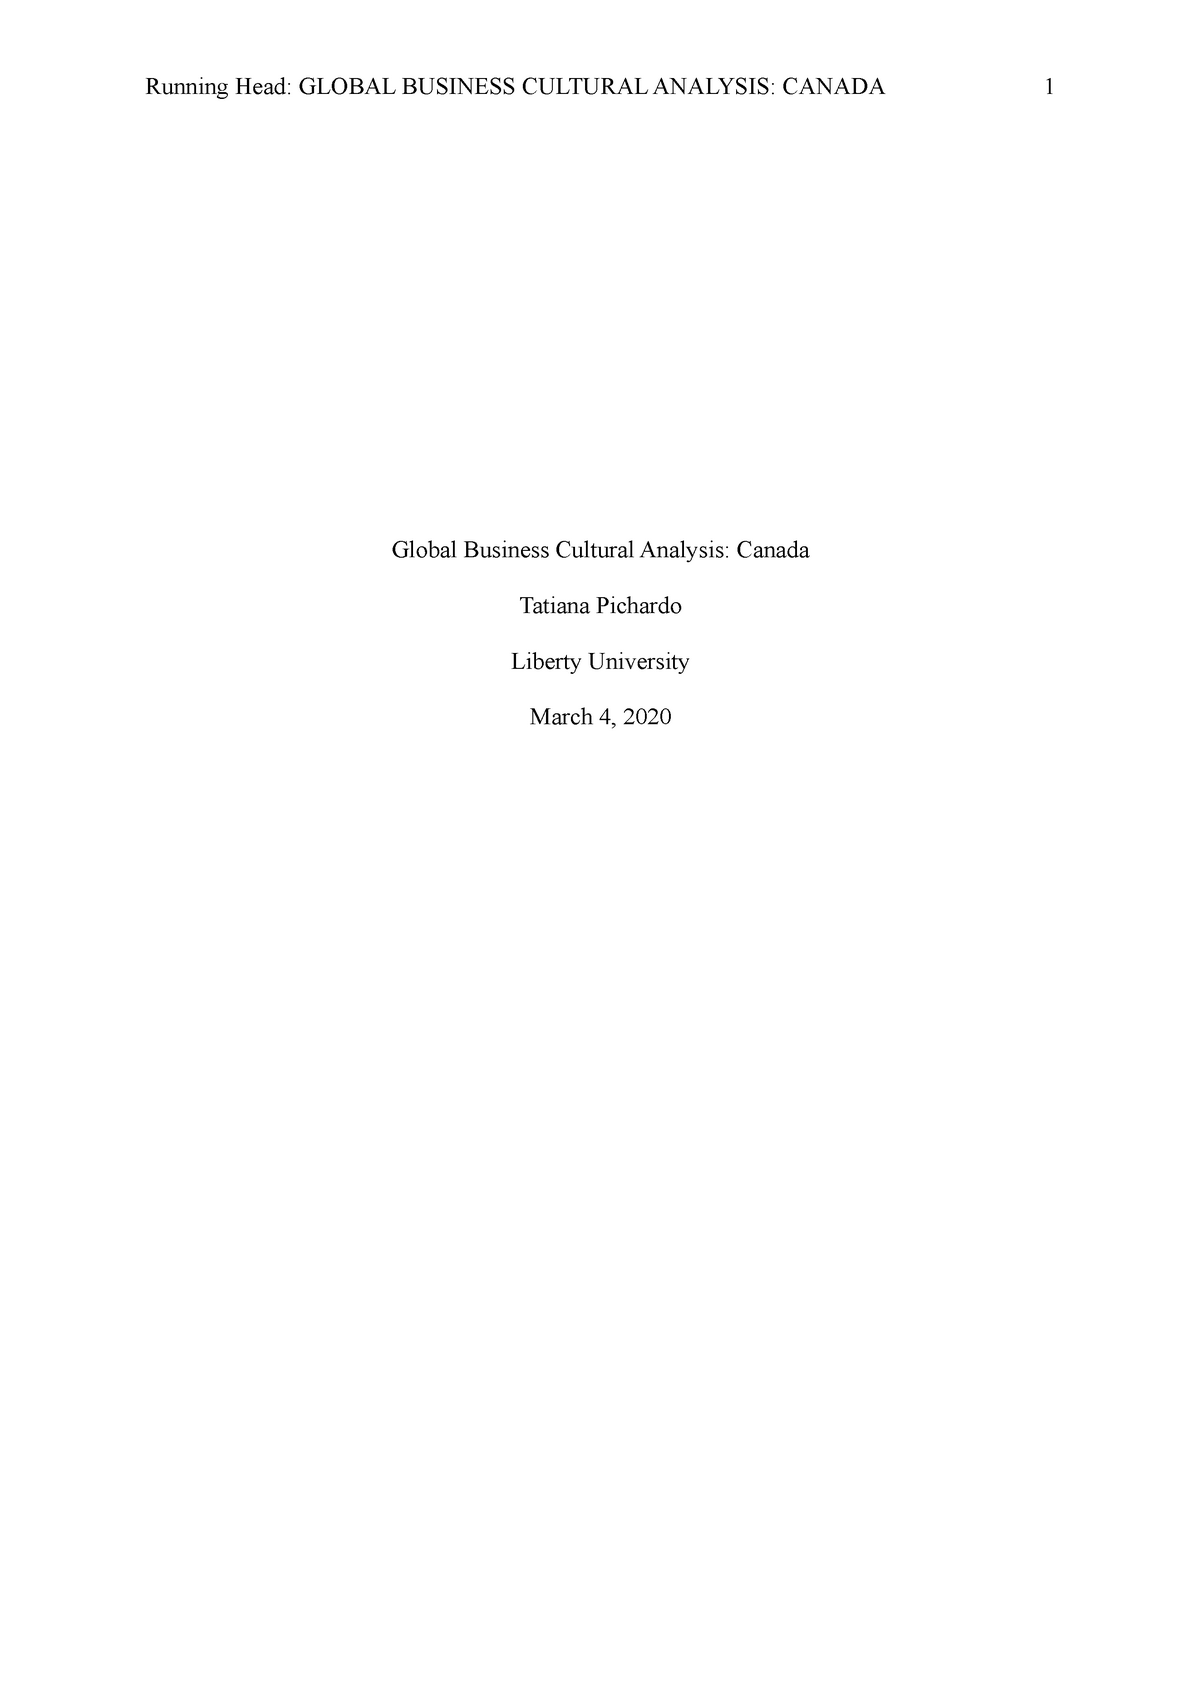 global business cultural analysis